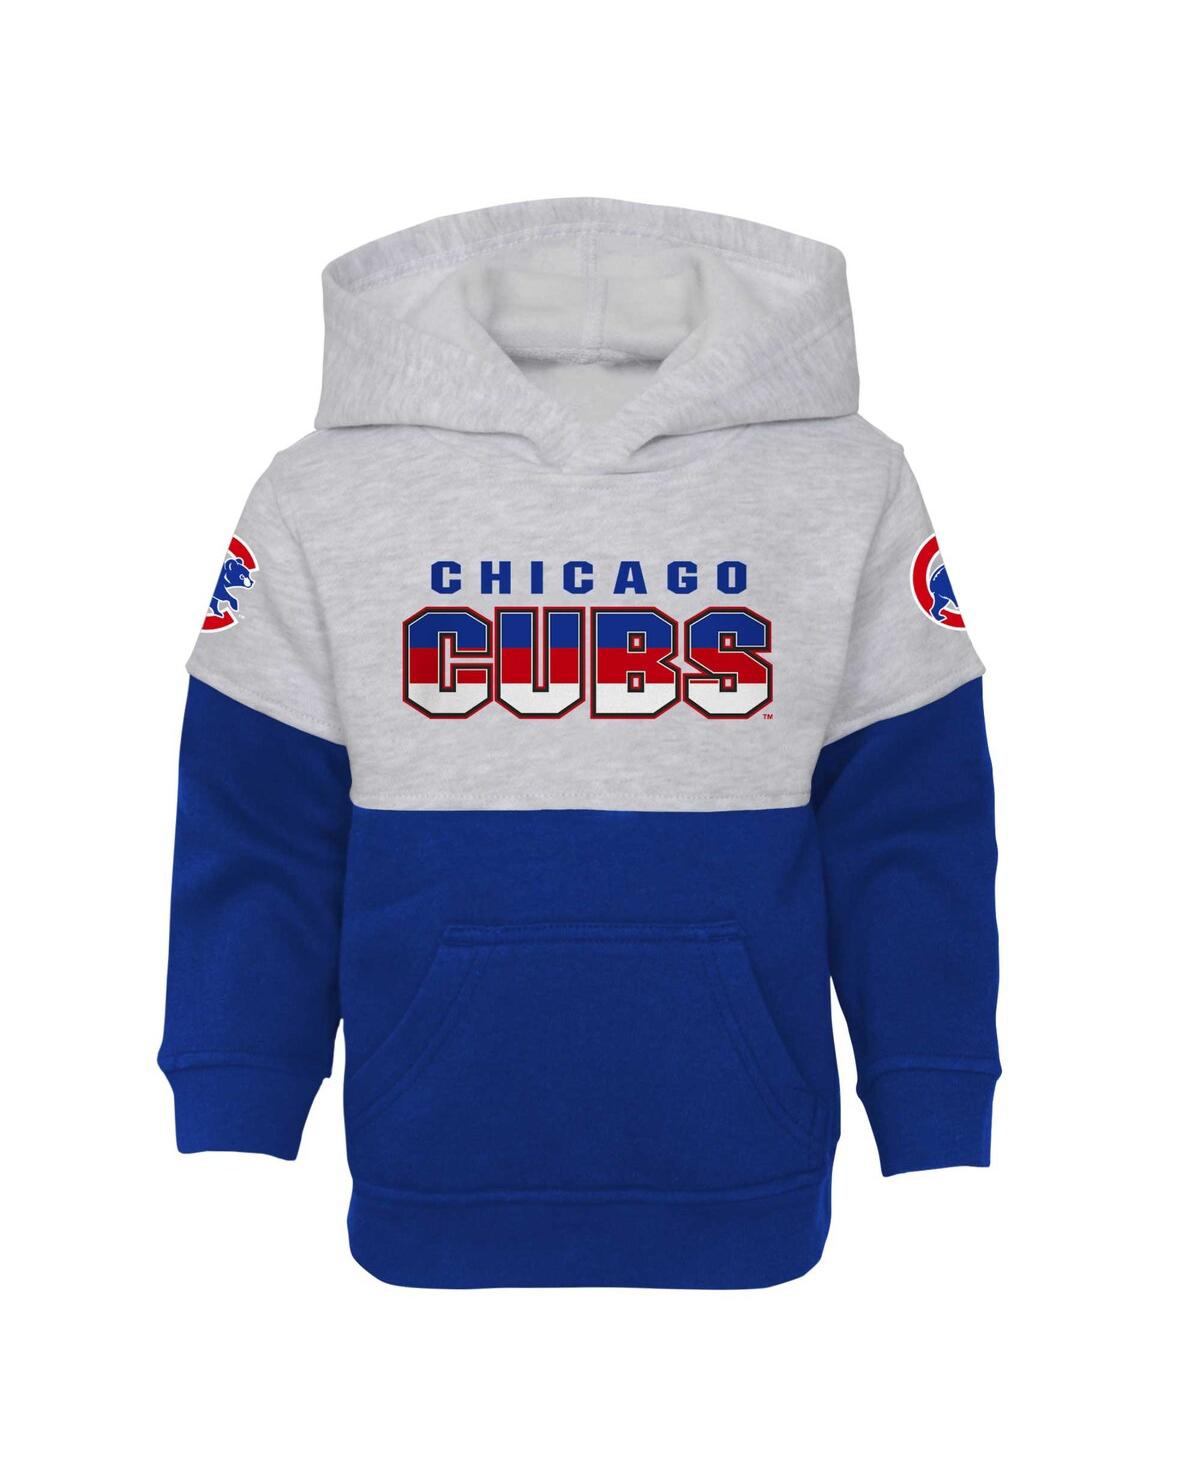 Shop Outerstuff Toddler Boys And Girls Royal, Heather Gray Chicago Cubs Two-piece Playmaker Set In Royal,heather Gray